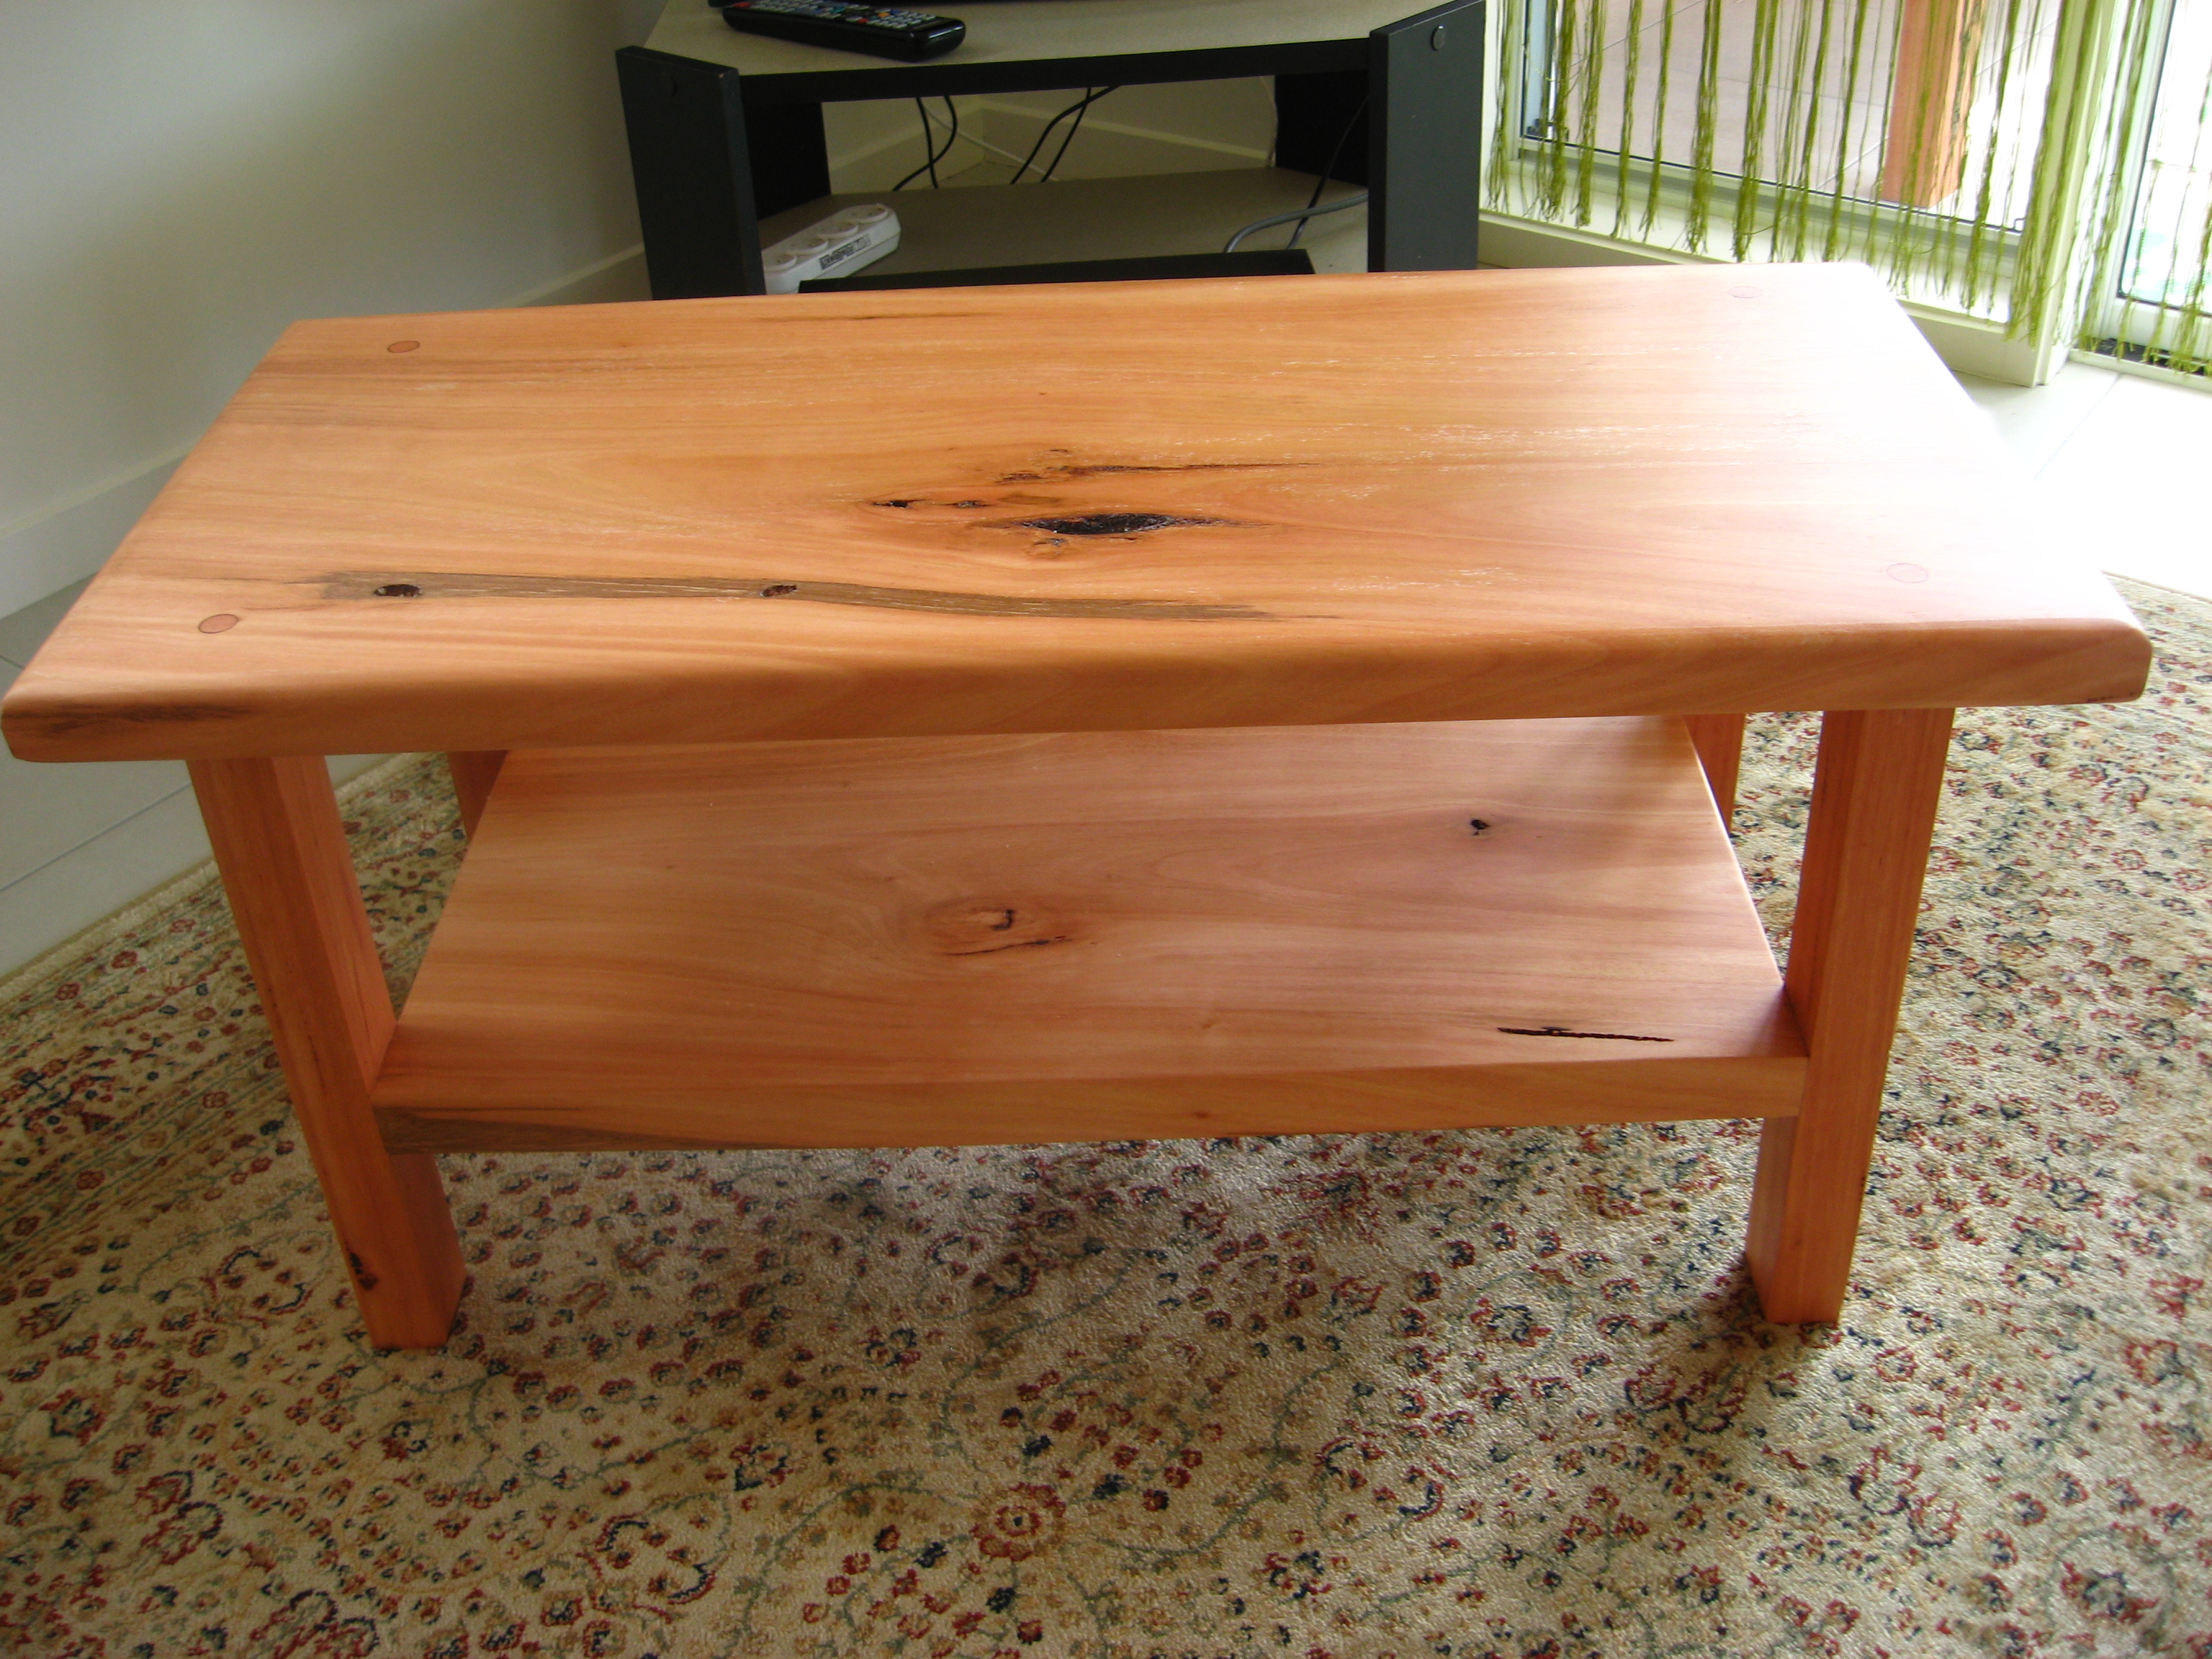 wooden coffee table design photo - 1